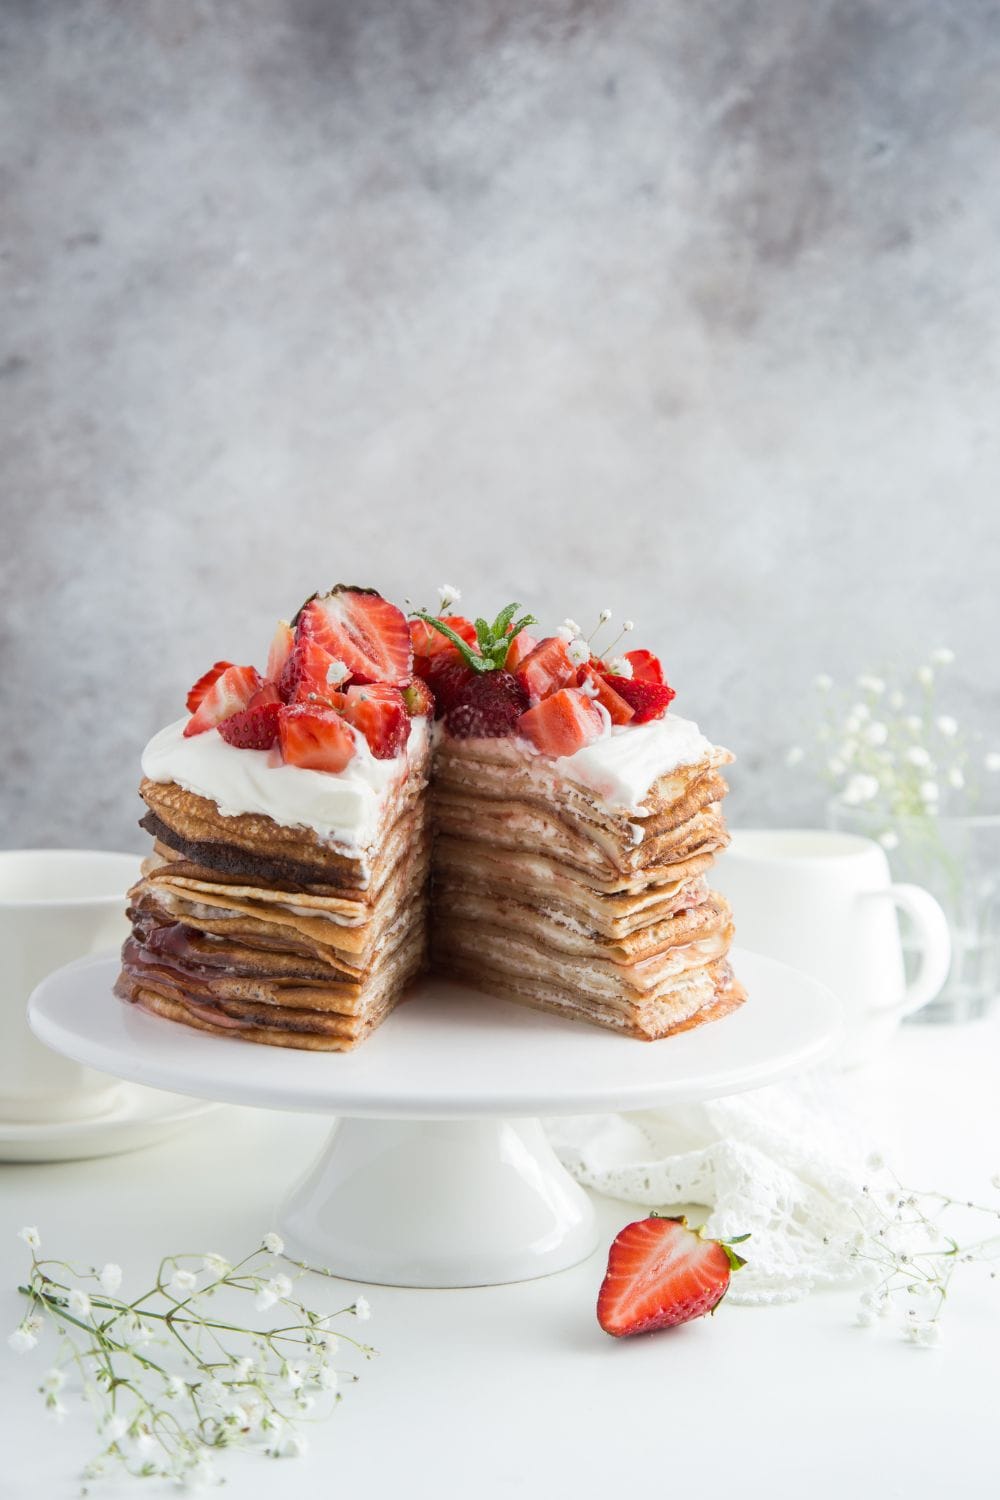 Crepe Cake with Frosting and Fresh Strawberries on Top